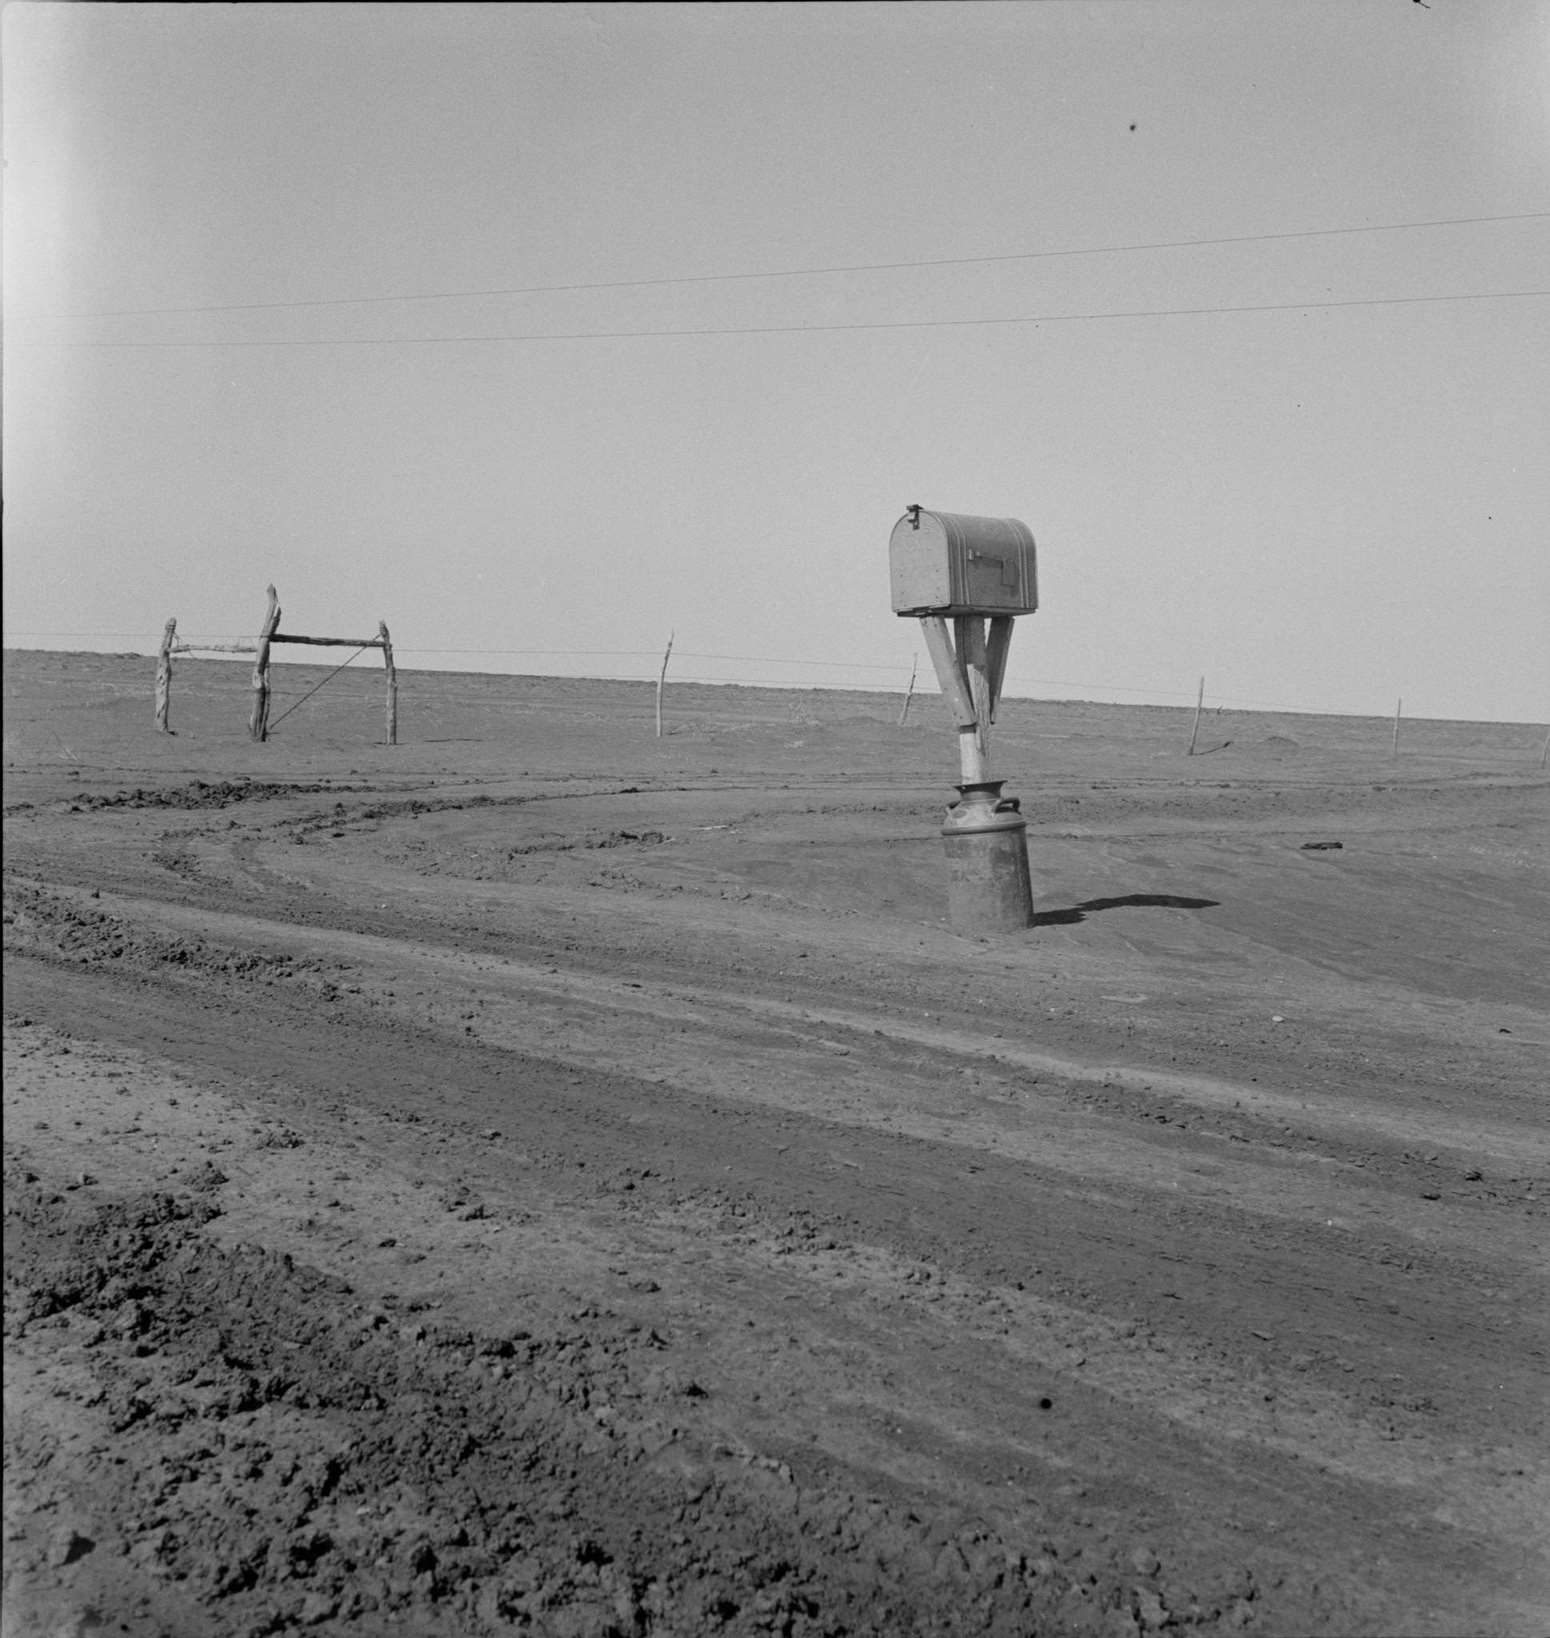 Mailbox in Dust Bowl. Coldwater District, north of Dalhart, Texas, 1930s